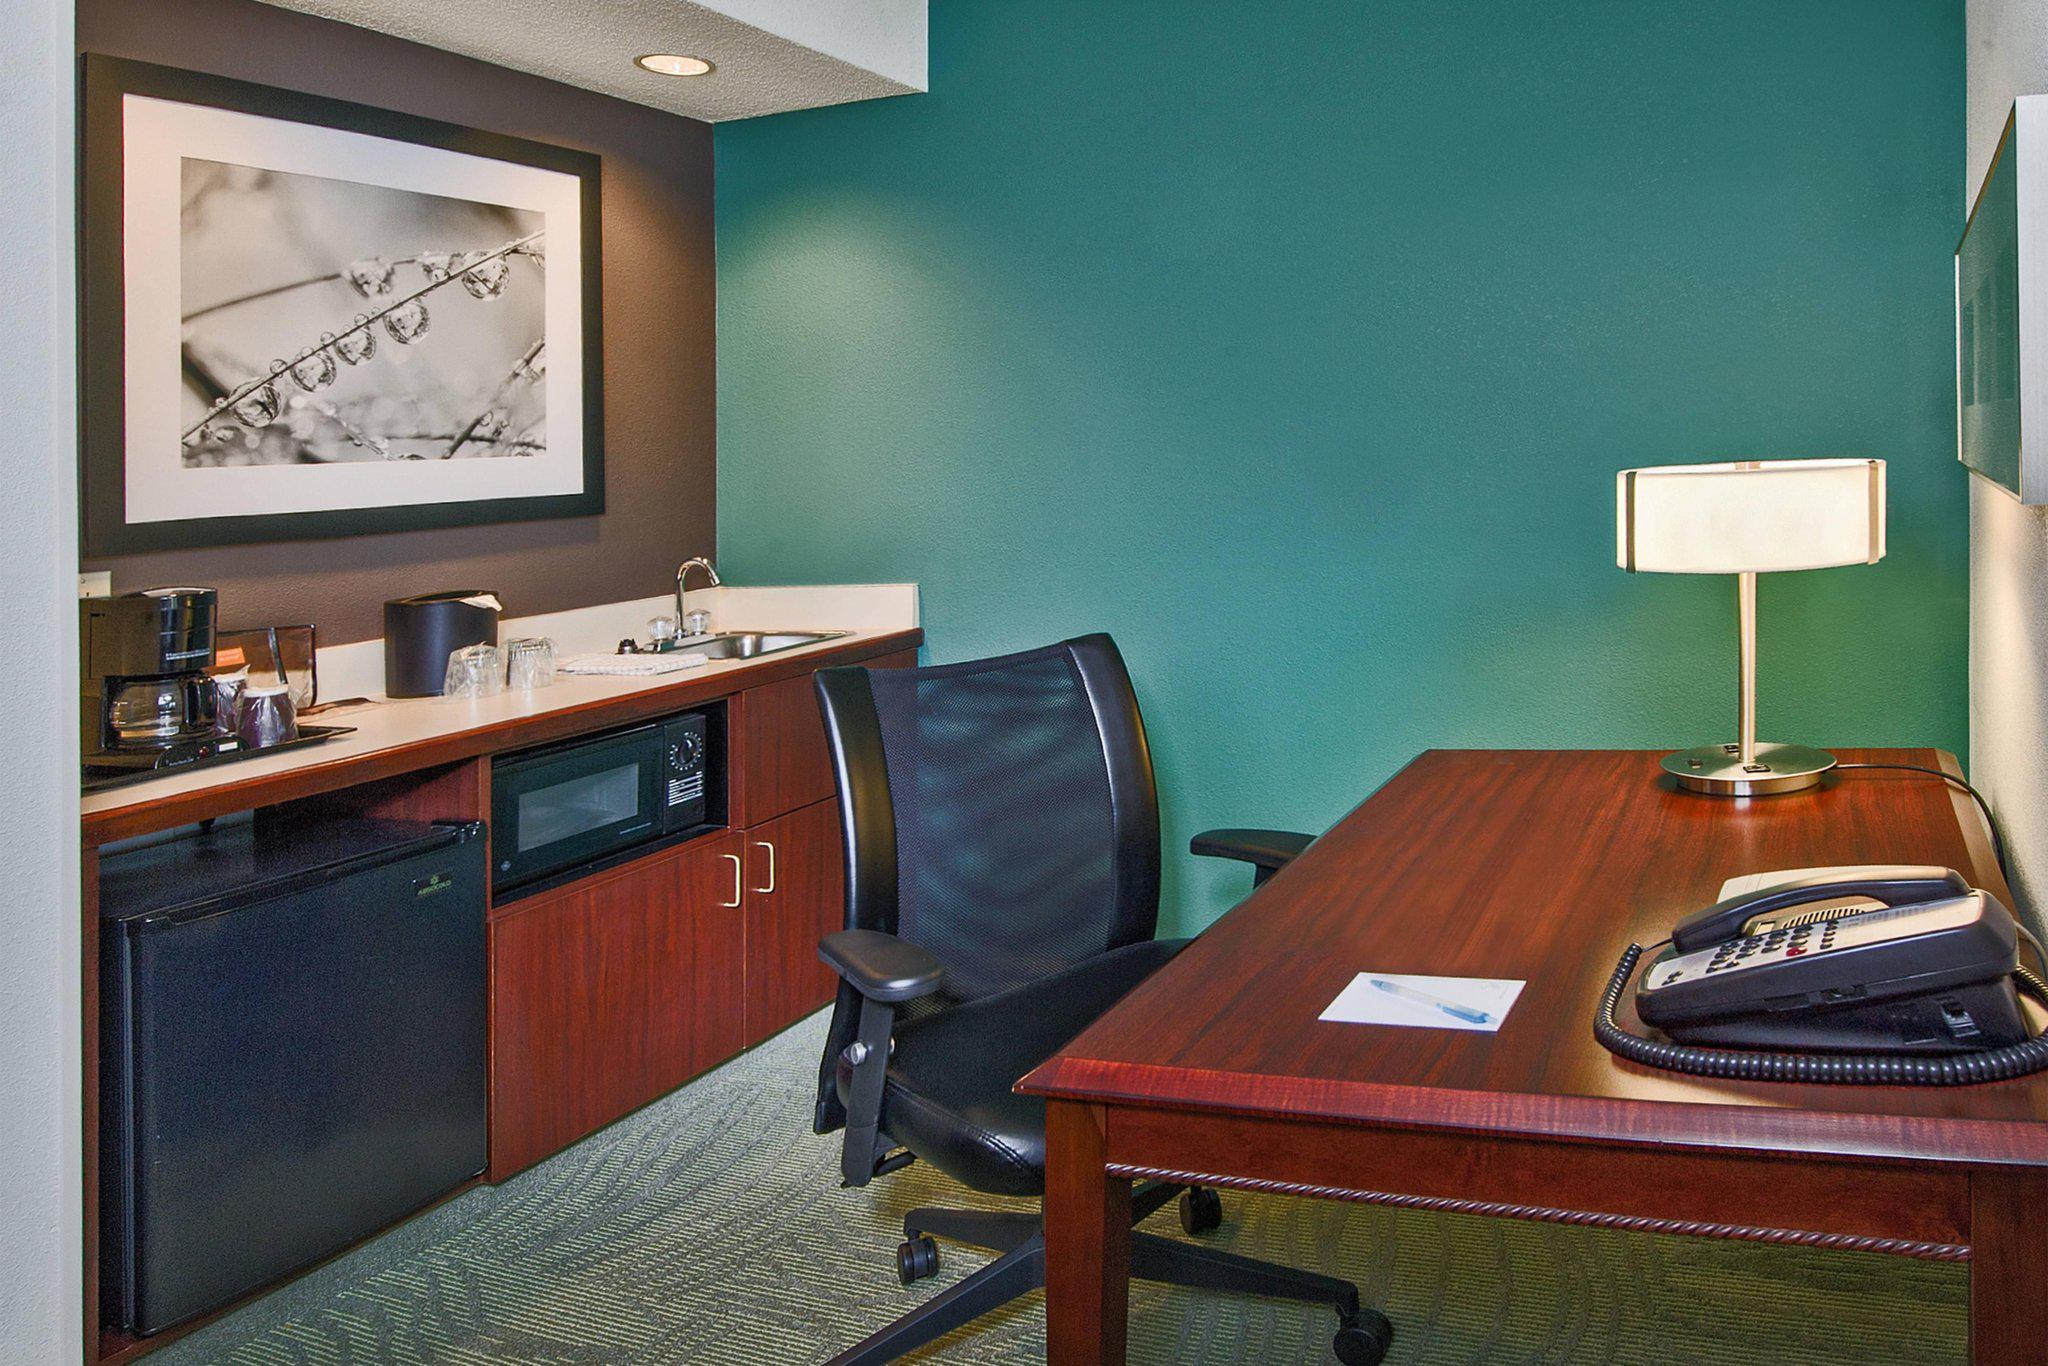 SpringHill Suites by Marriott Raleigh-Durham Airport/Research Triangle Park, Dur